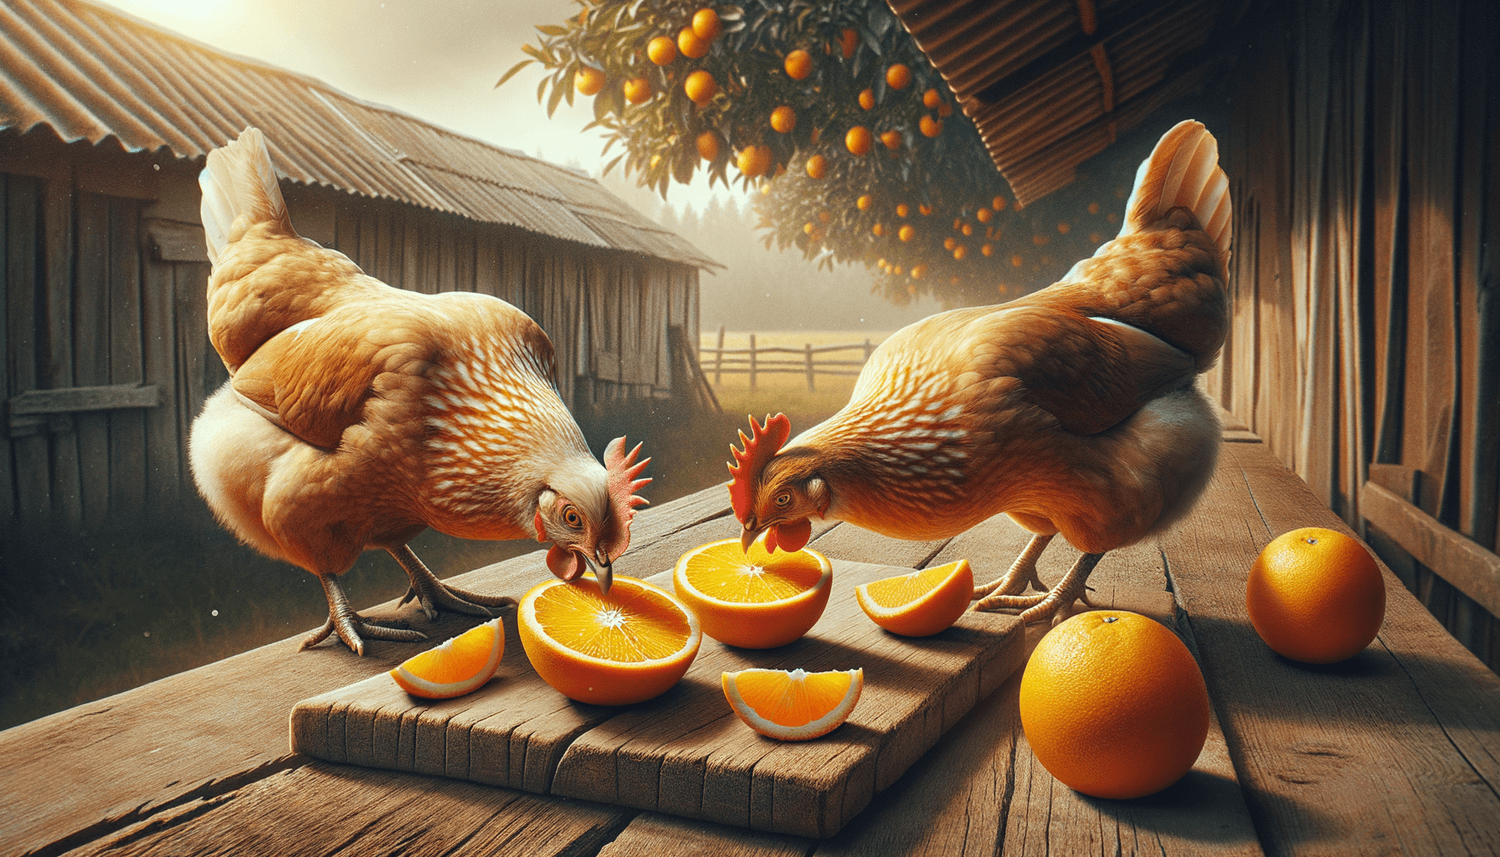 Can Chickens Eat Oranges?